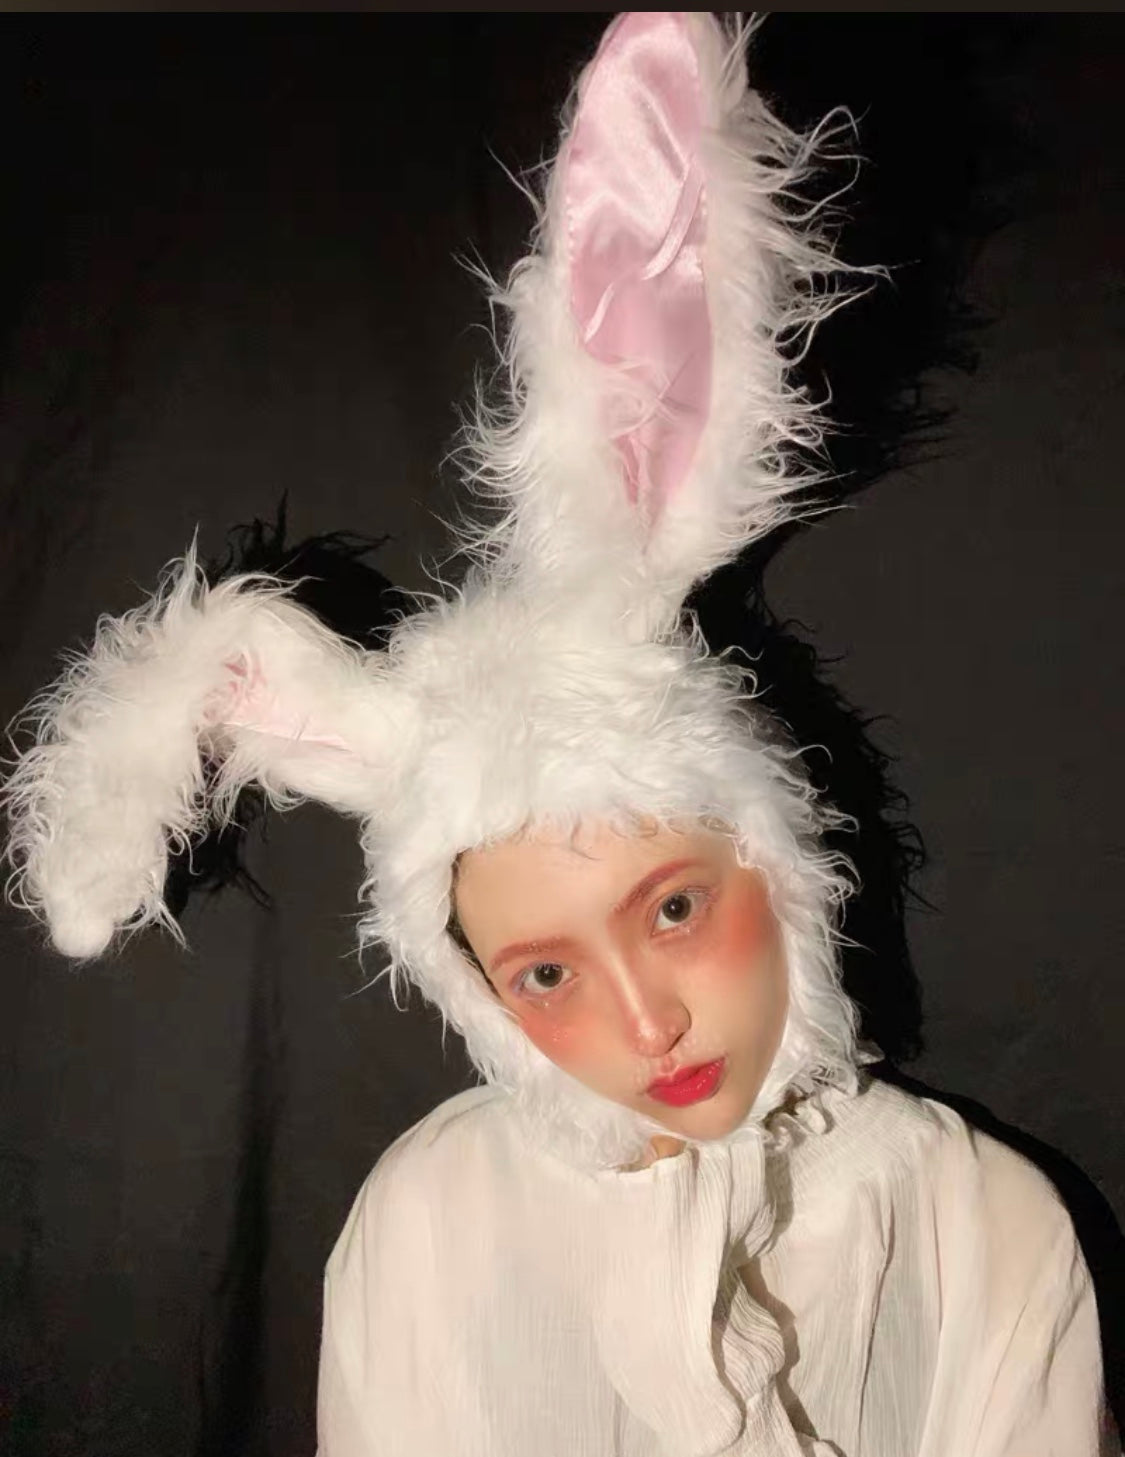 Pink Bunny Ears Hat SIZE Medium Rabbit Ears Hat Expedited 